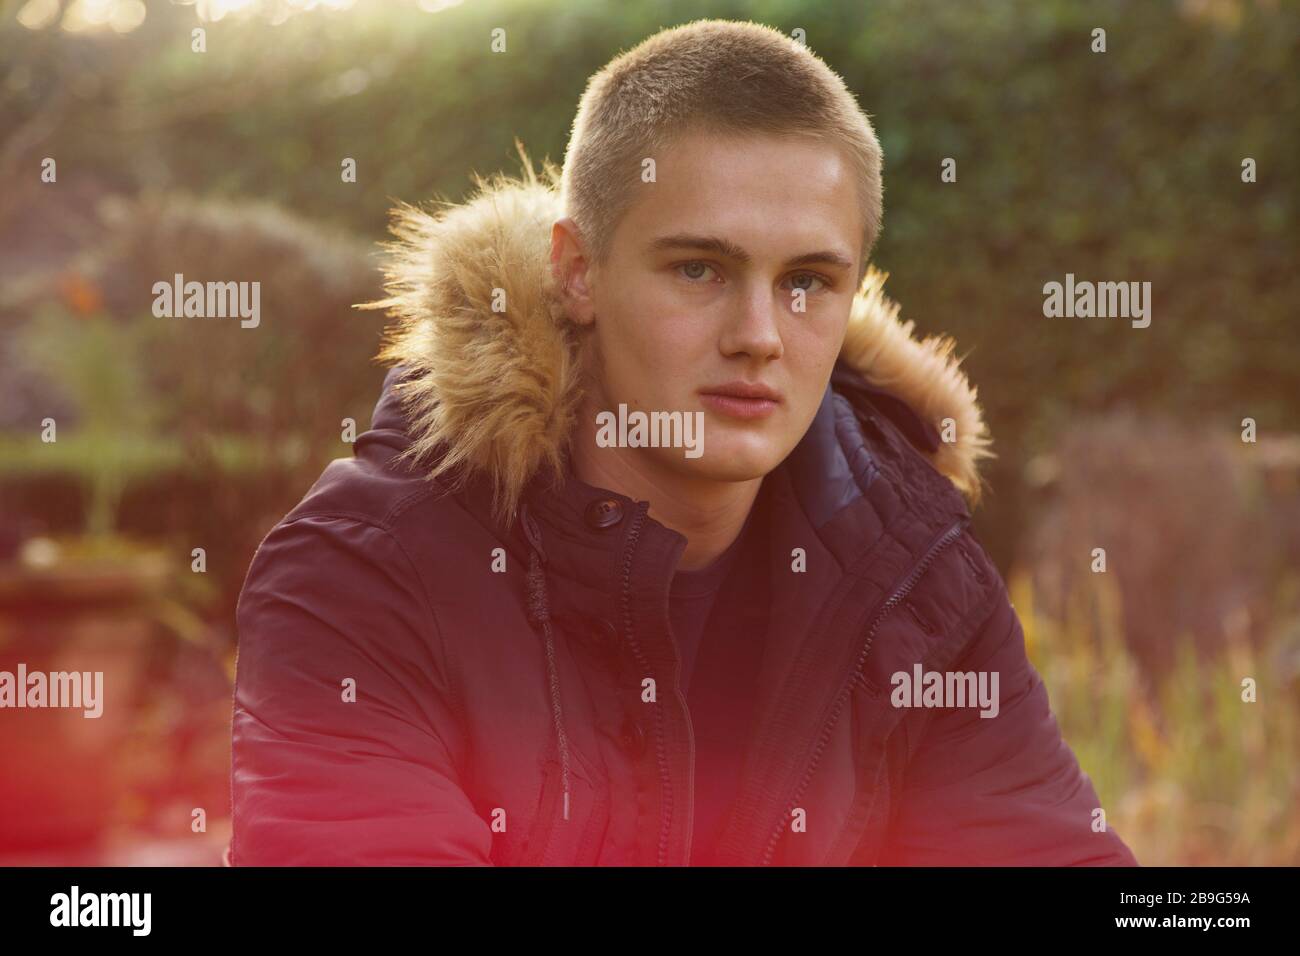 Portrait confident teenage boy in jacket with fur hood in park Stock Photo